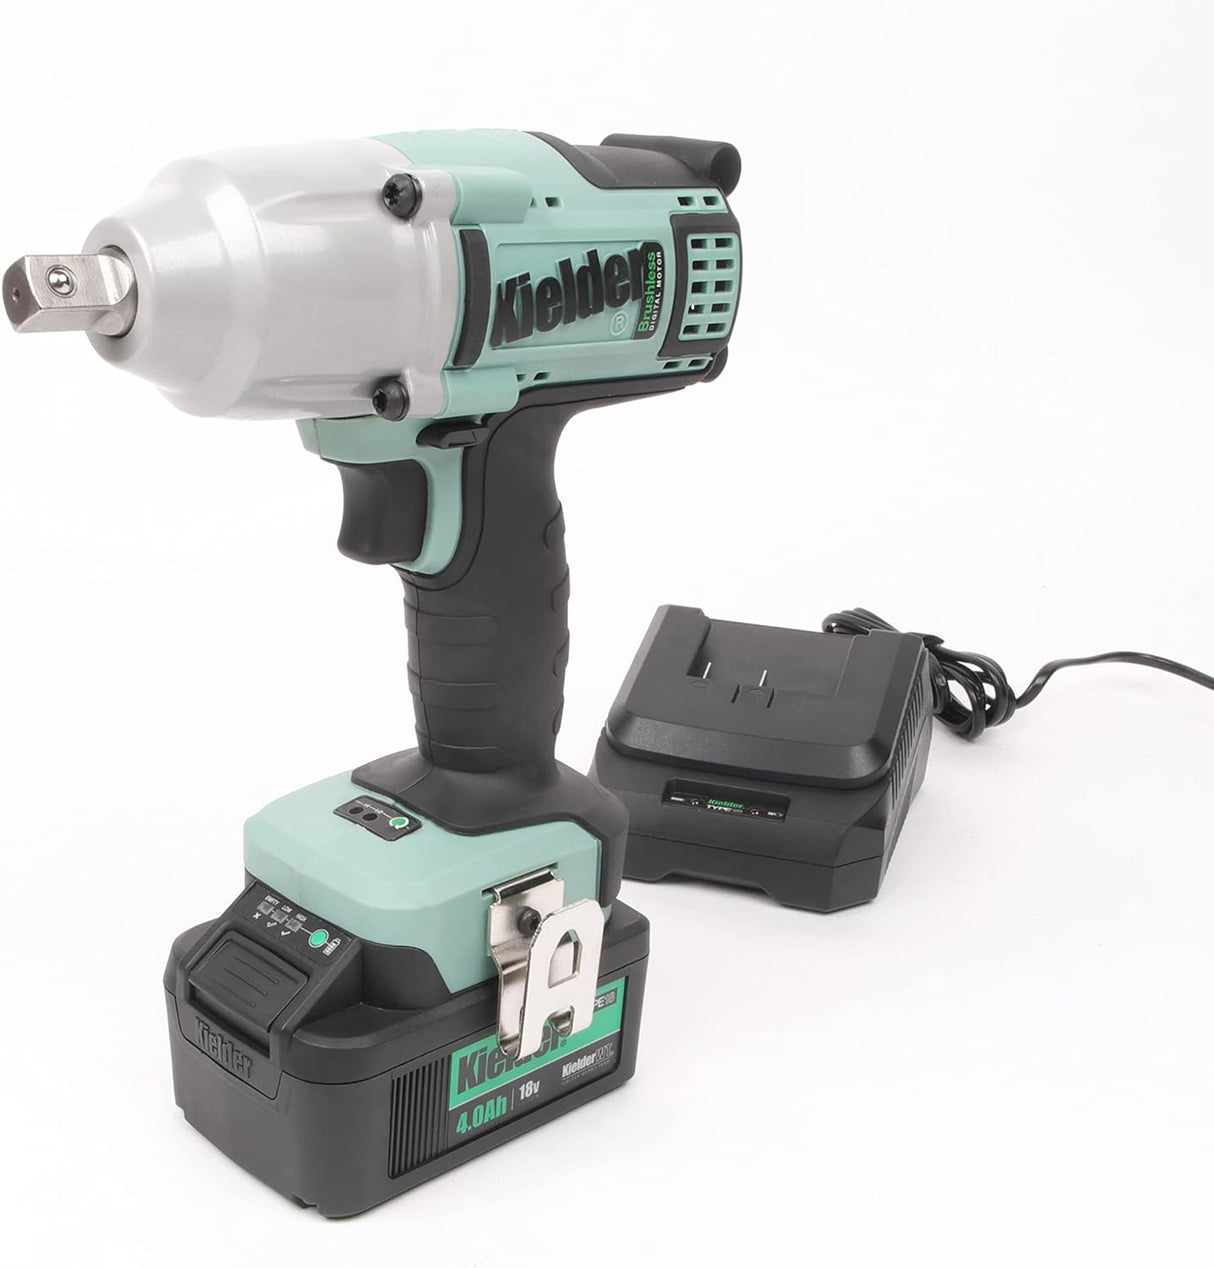 Kielder KWT-012-83 - 18V TYPE18 Brushless Cordless 1/2" Mid Torque Impact Wrench, 1 x 4.0Ah TYPE18 Li-ion Battery and Charger